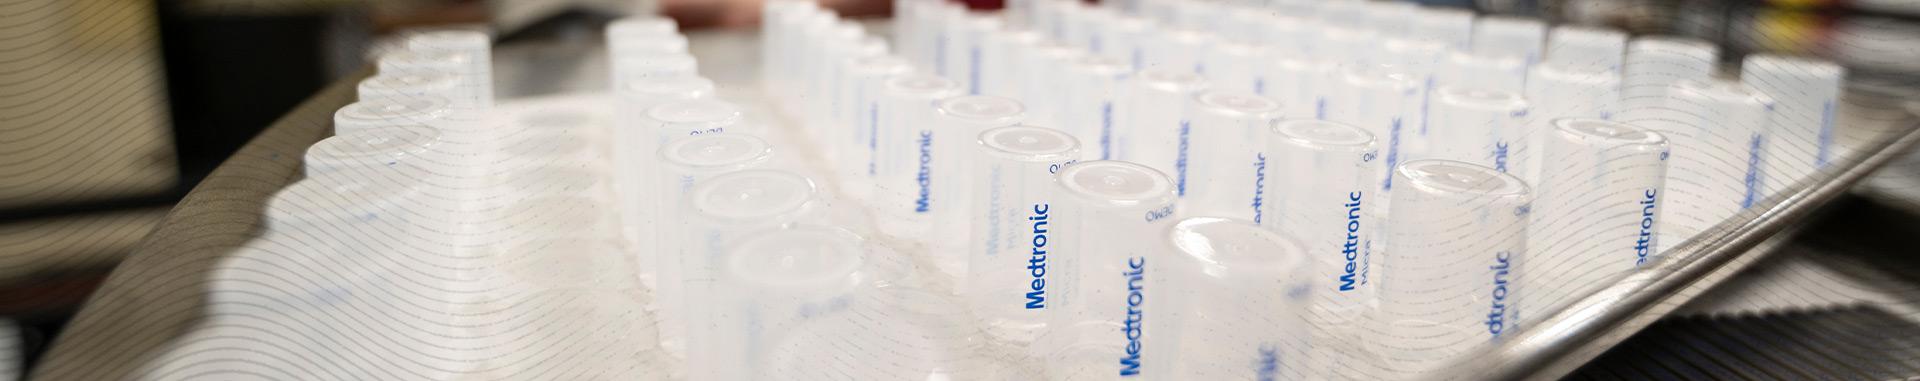 AMS Micromedical product closeup of clear-plastic, bottle-style Medtronic technology